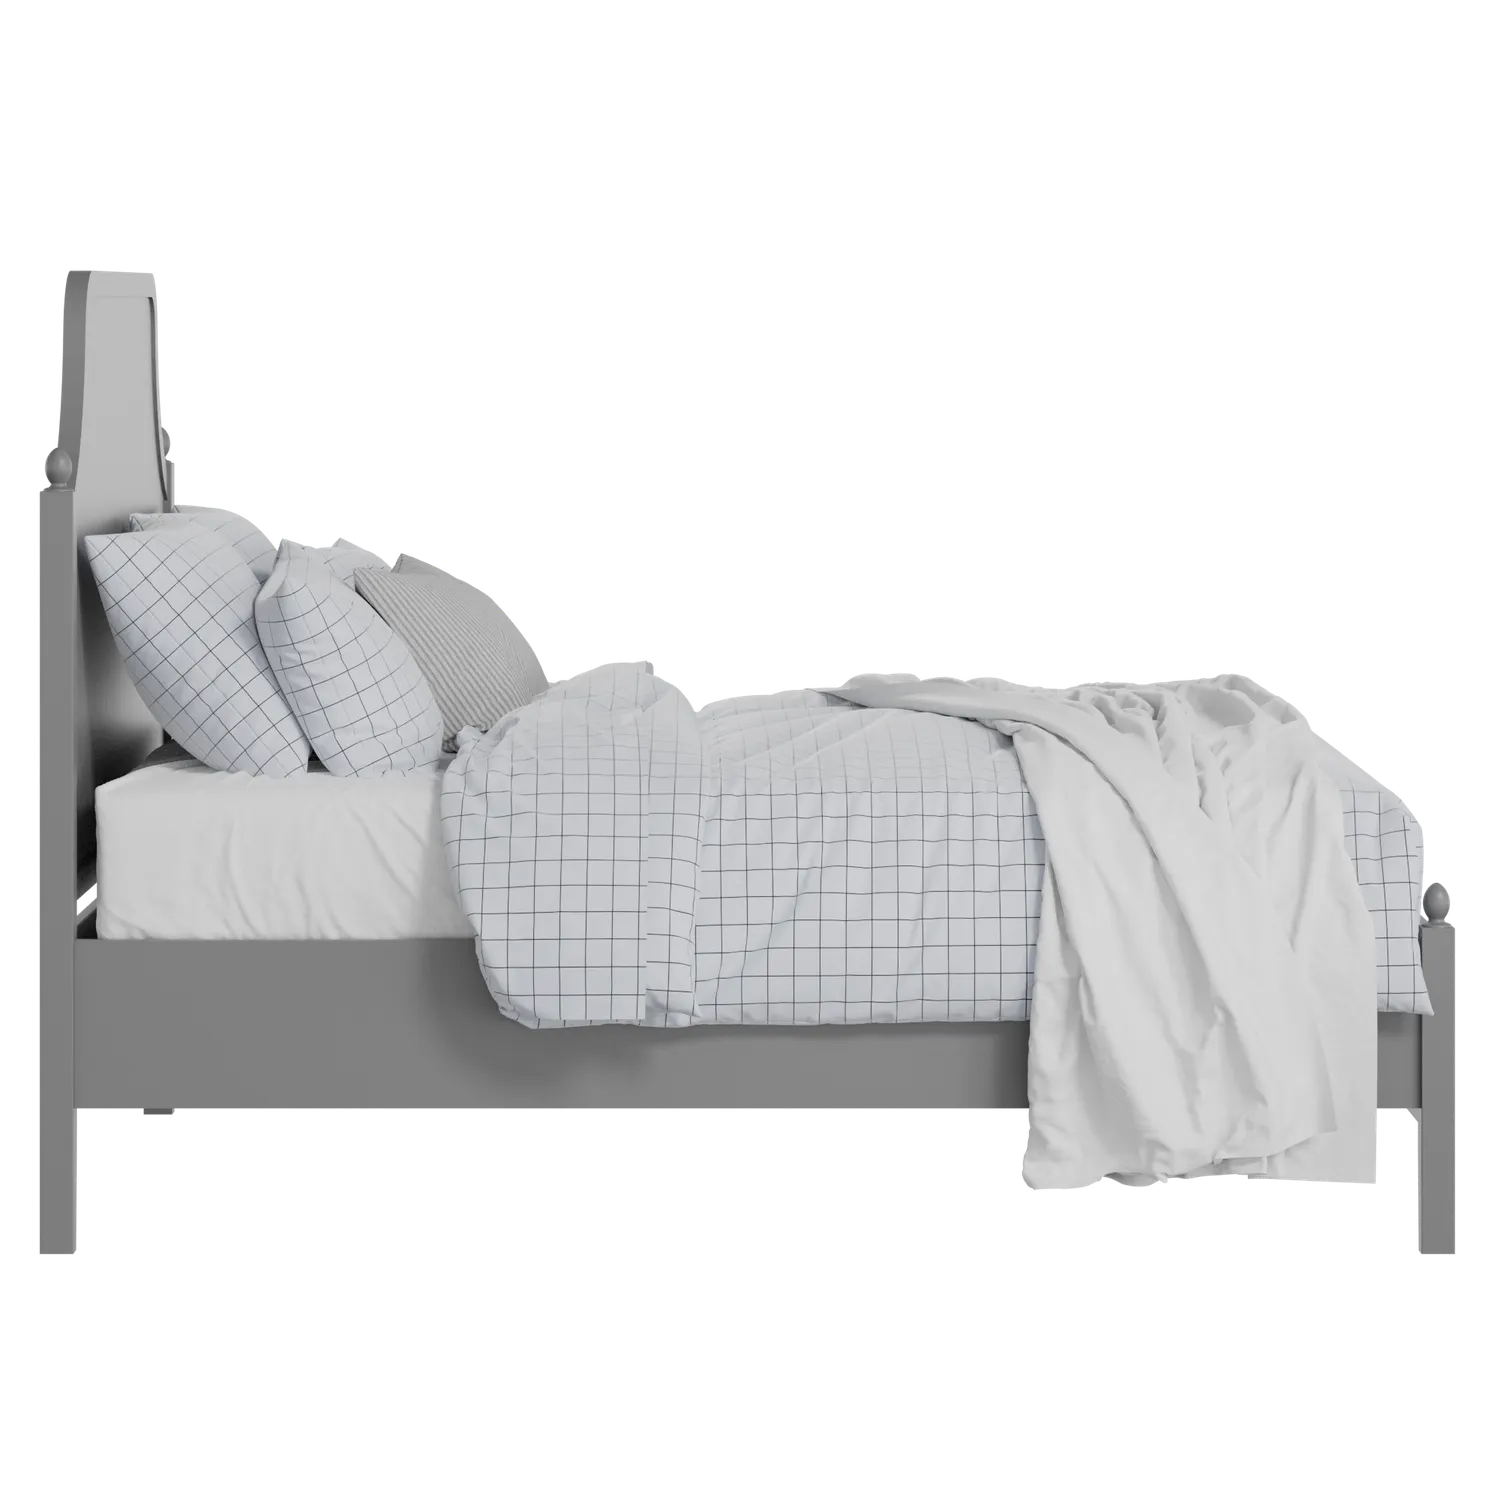 Ruskin Slim painted wood bed in grey with Juno mattress